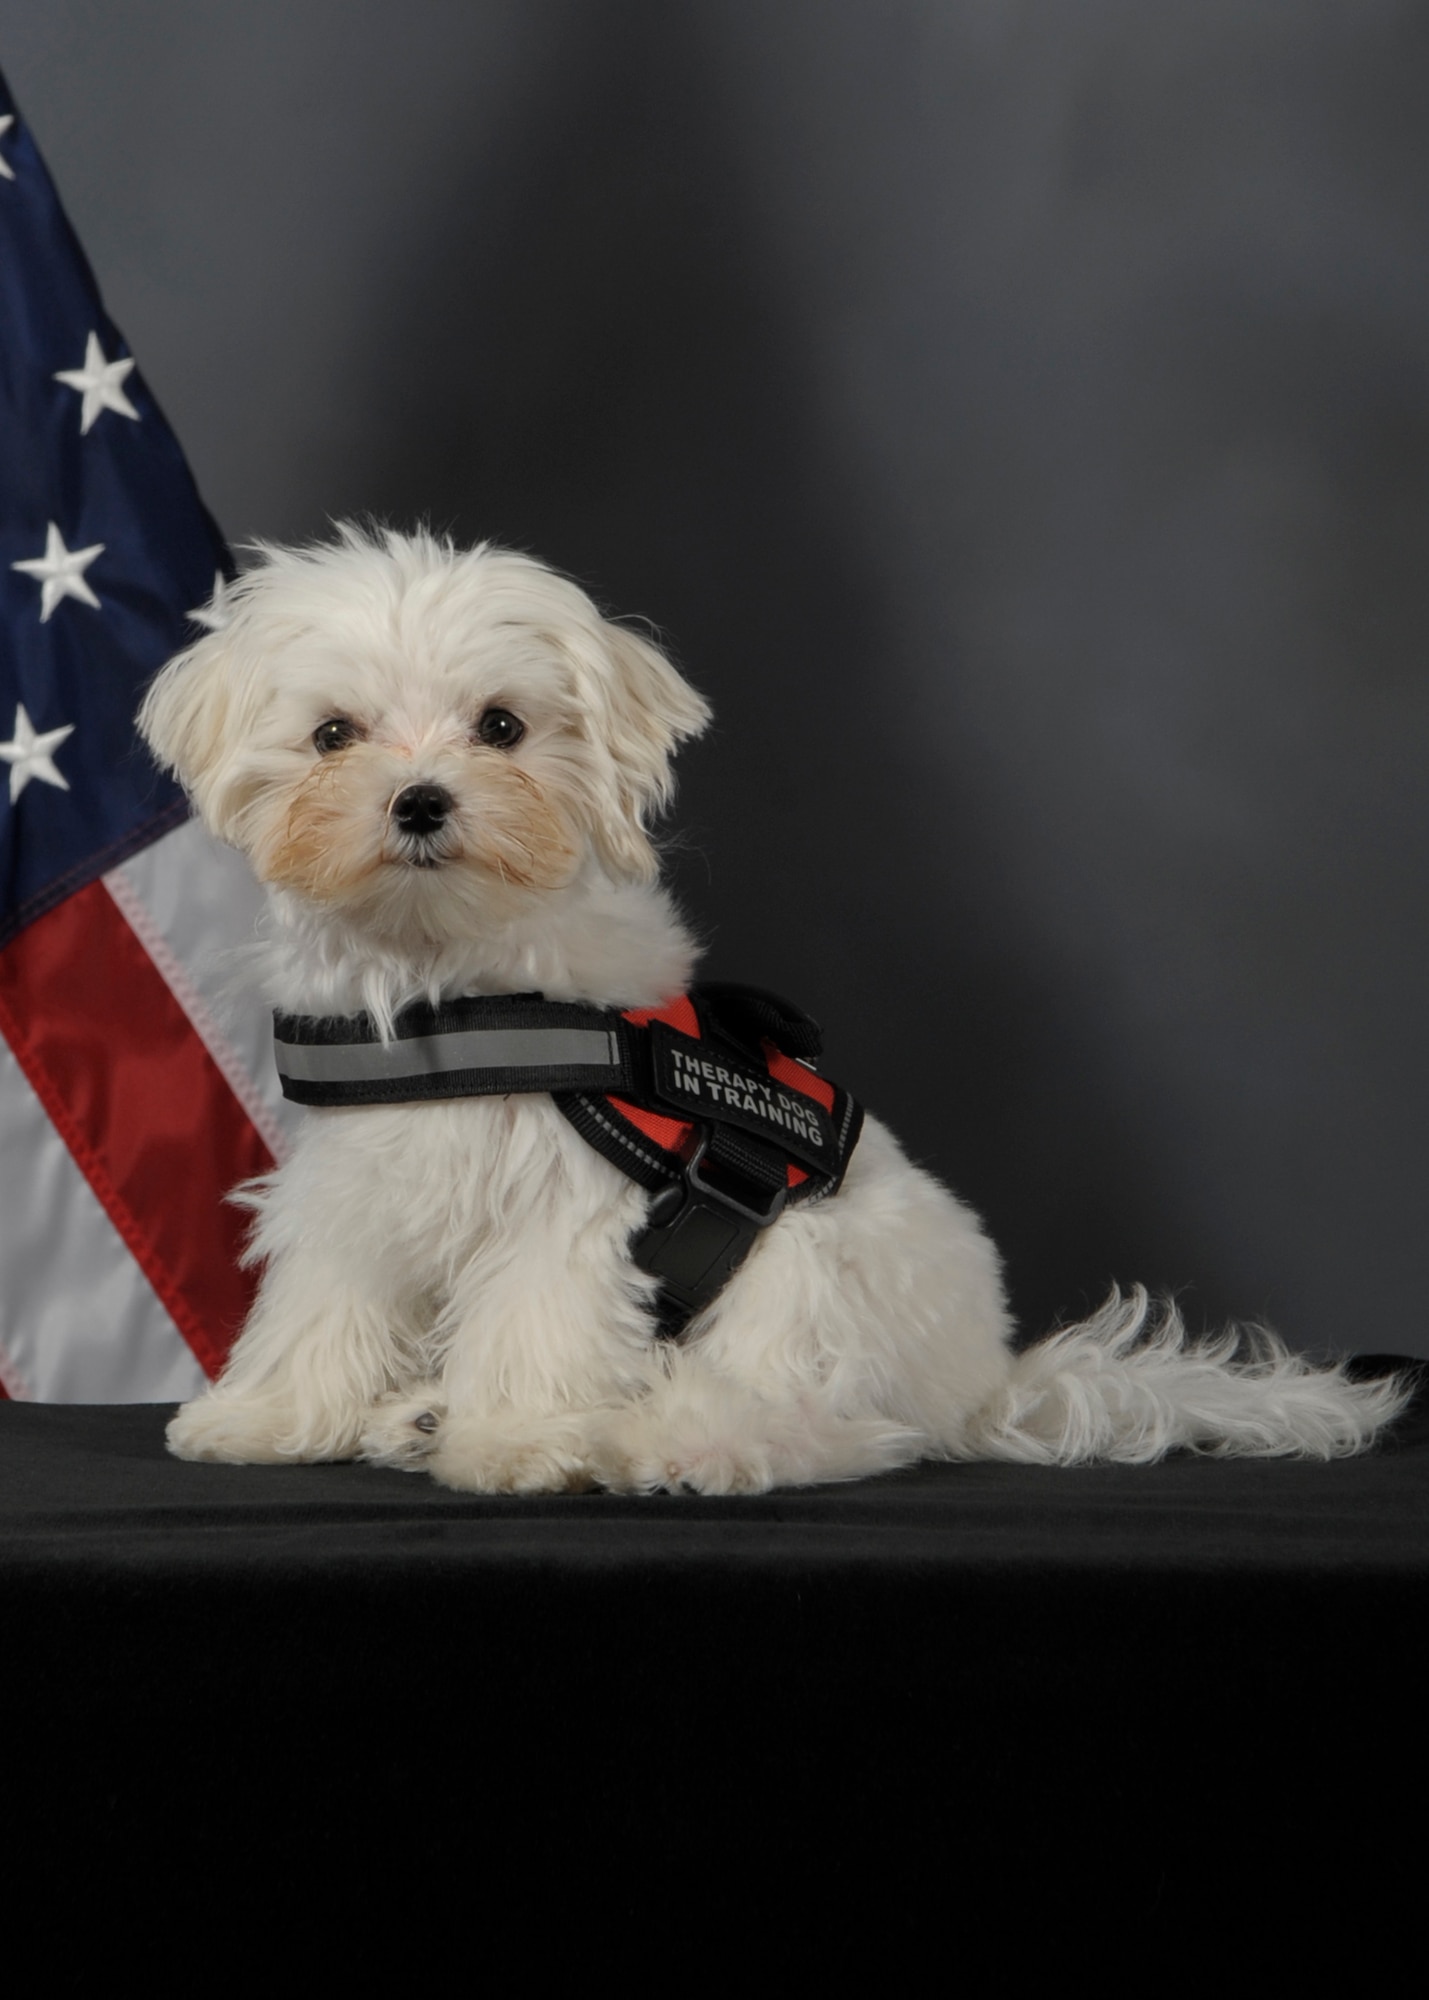 Khaos, the first Sexual Assault Prevention Response therapy dog in training assigned to the 6th Air Mobility Wing, pauses for an official photo on MacDill Air Force Base, Fla., March 29, 2017. Khaos is part of the Paw Support Program in which he will provide therapeutic support for sexual assault victims and MacDill personnel. (U.S. Air Force photo by Senior Airman Mariette Adams)